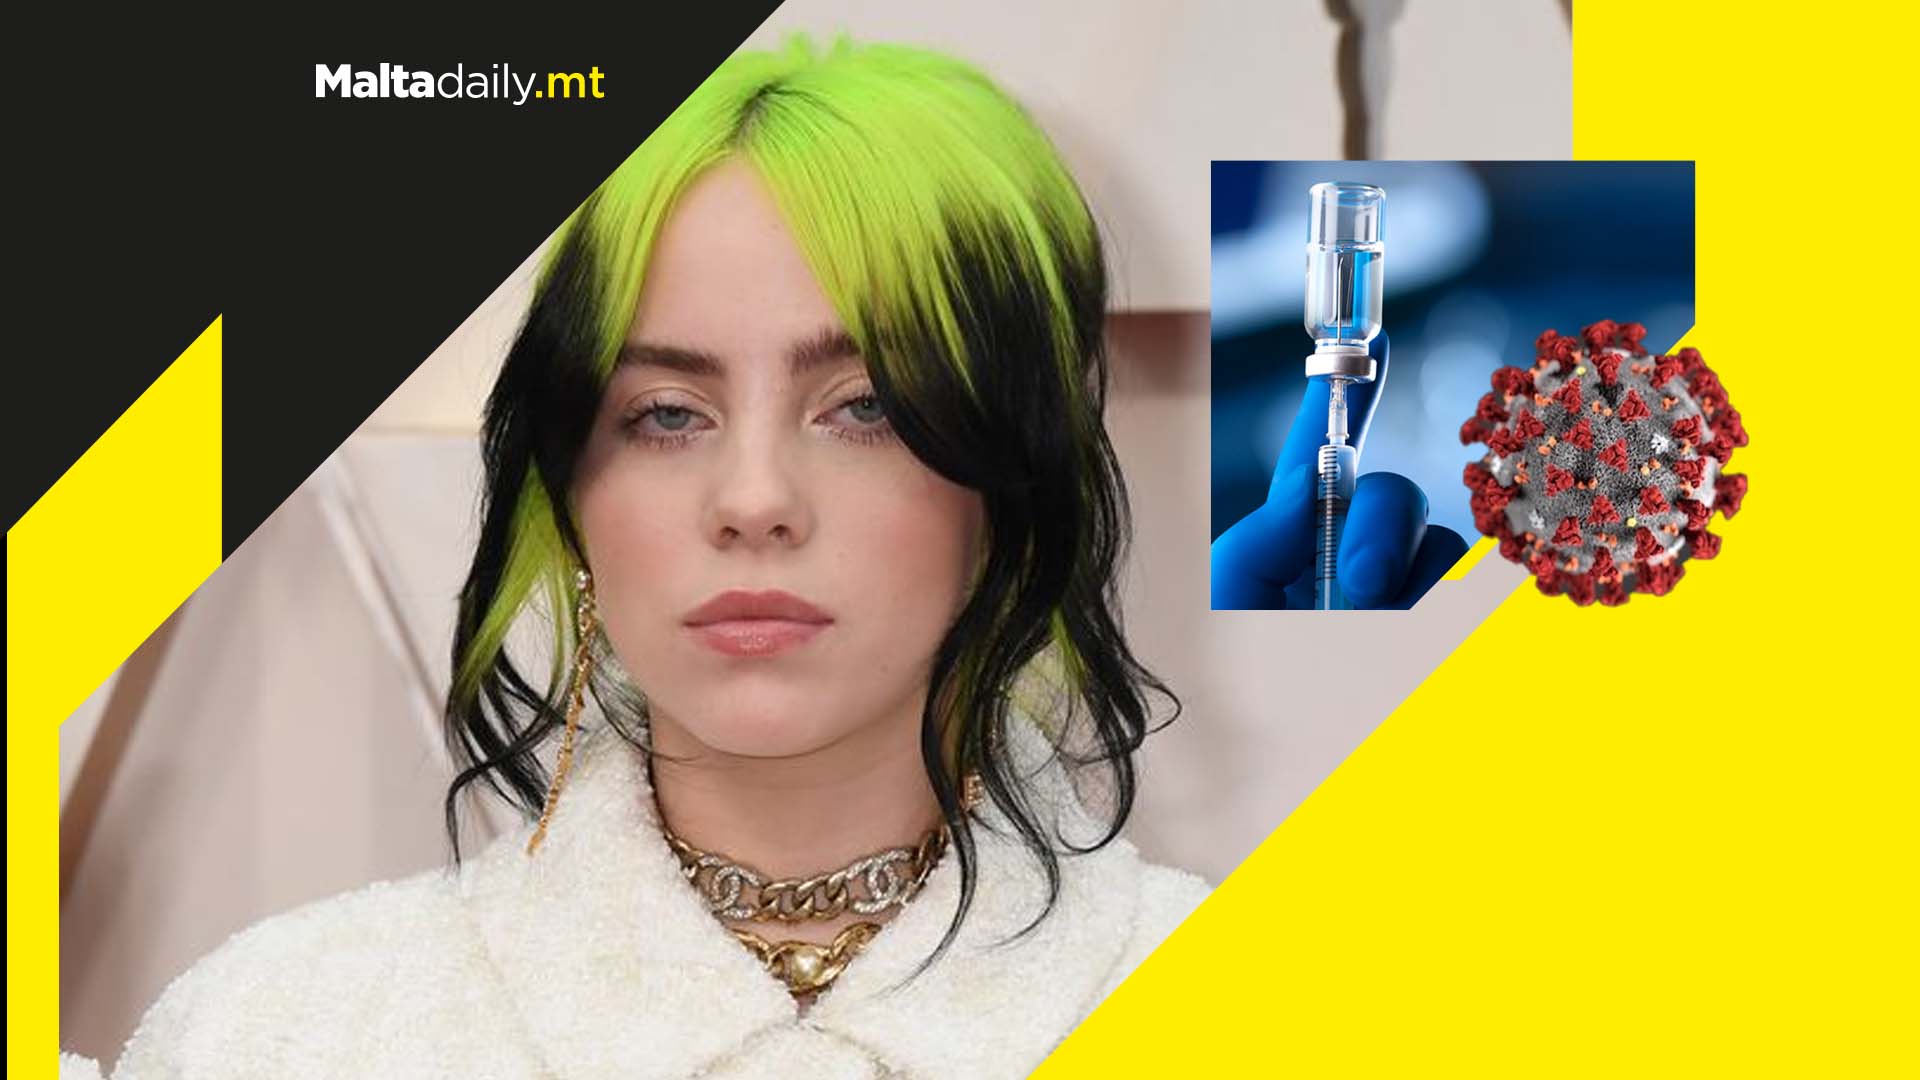 Billie Eilish says the vaccine saved her from dying from COVID